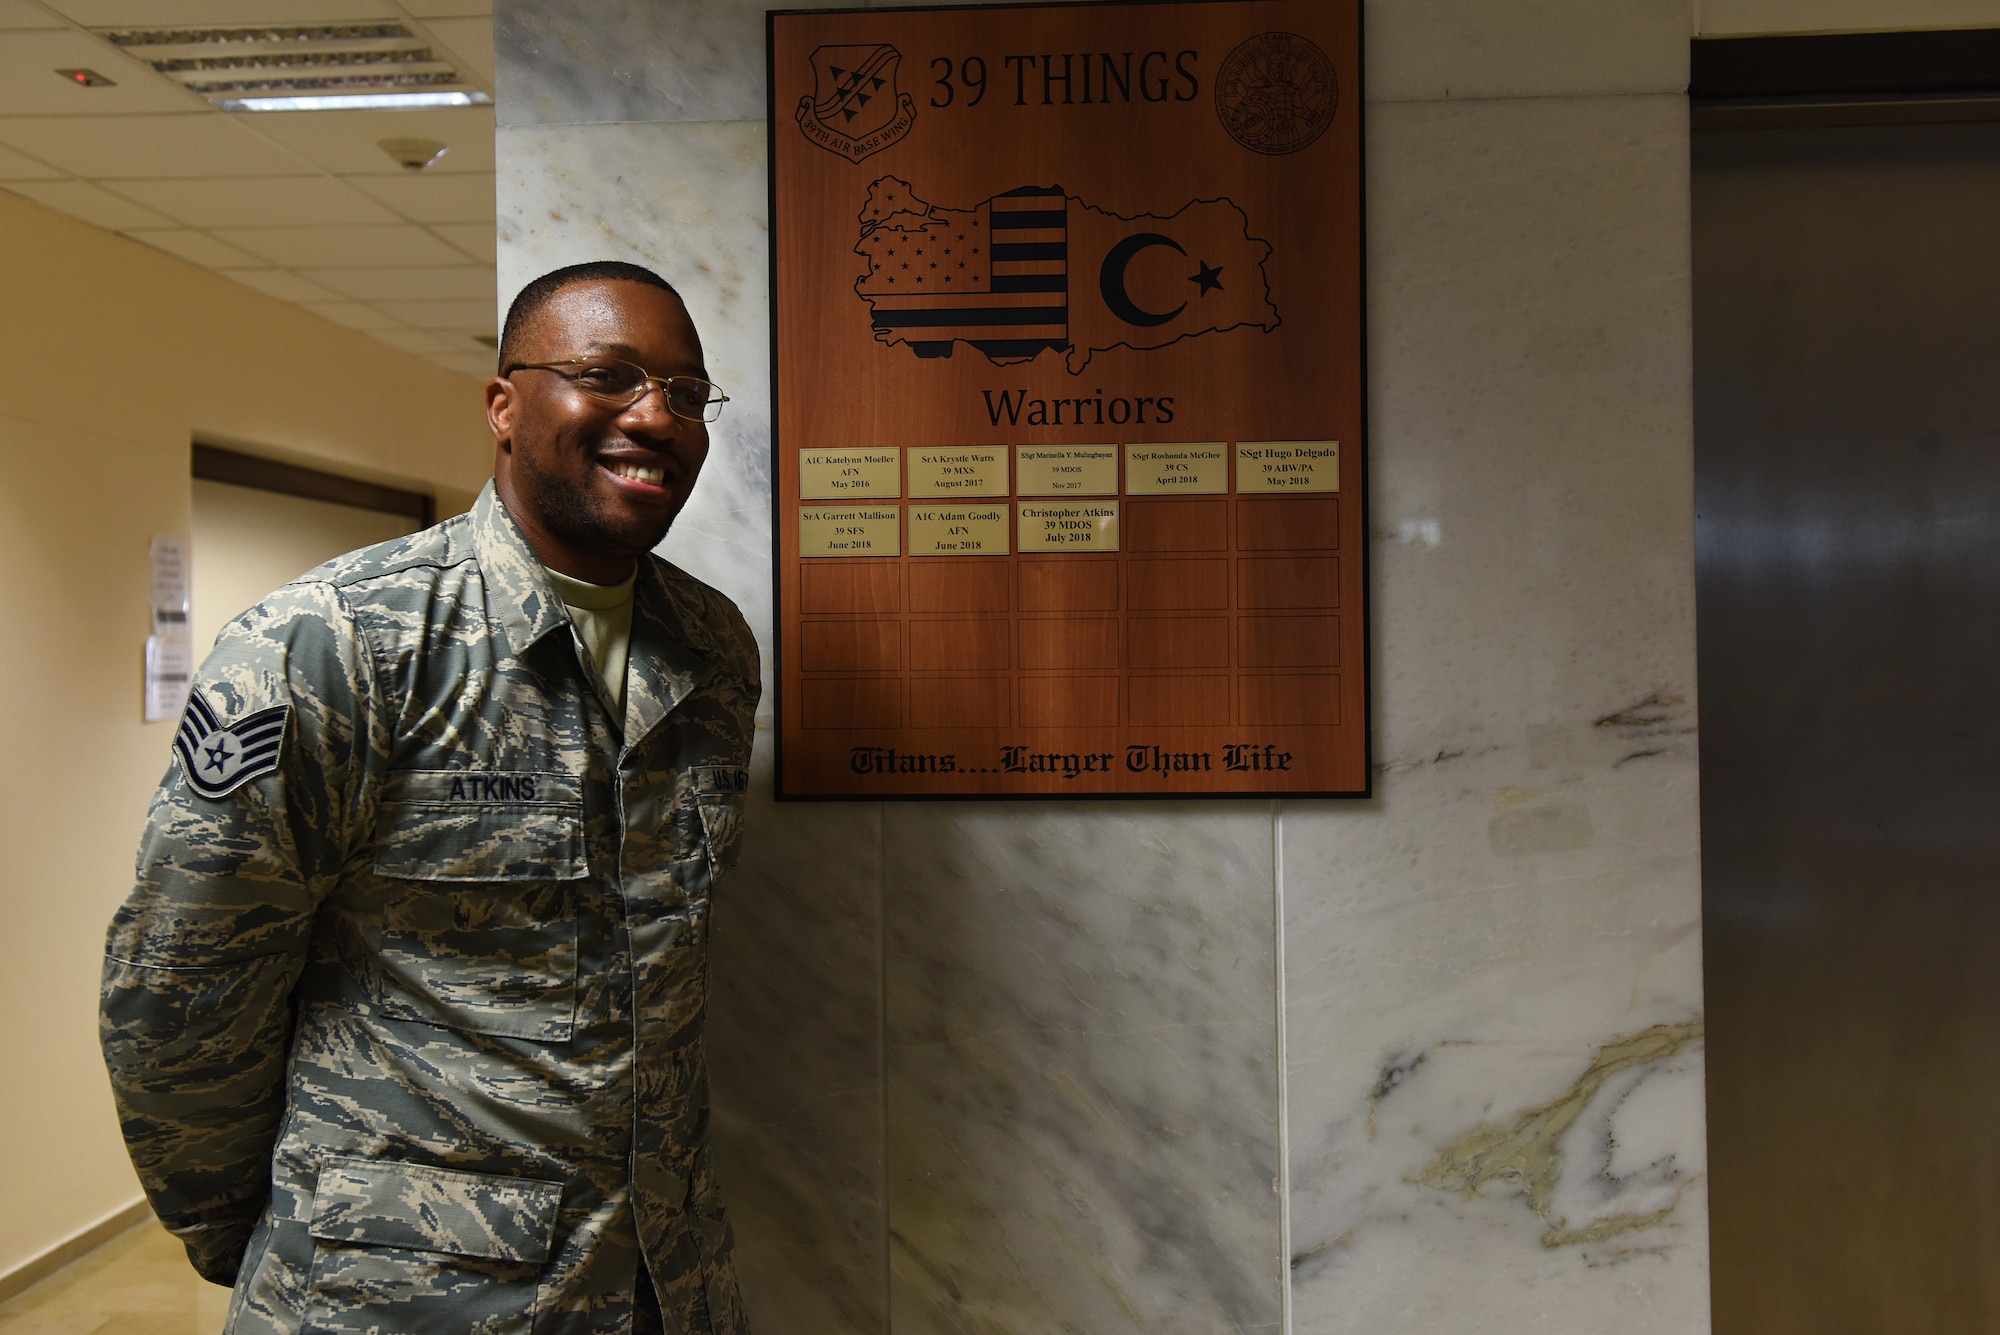 U.S. Air Force Staff Sgt. Christopher Atkins stands next to a inscribed plaque on the medical "Hall of Fame" after completing the Titan University Warrior Program at Incirlik Air Base, Turkey, July 31, 2018.